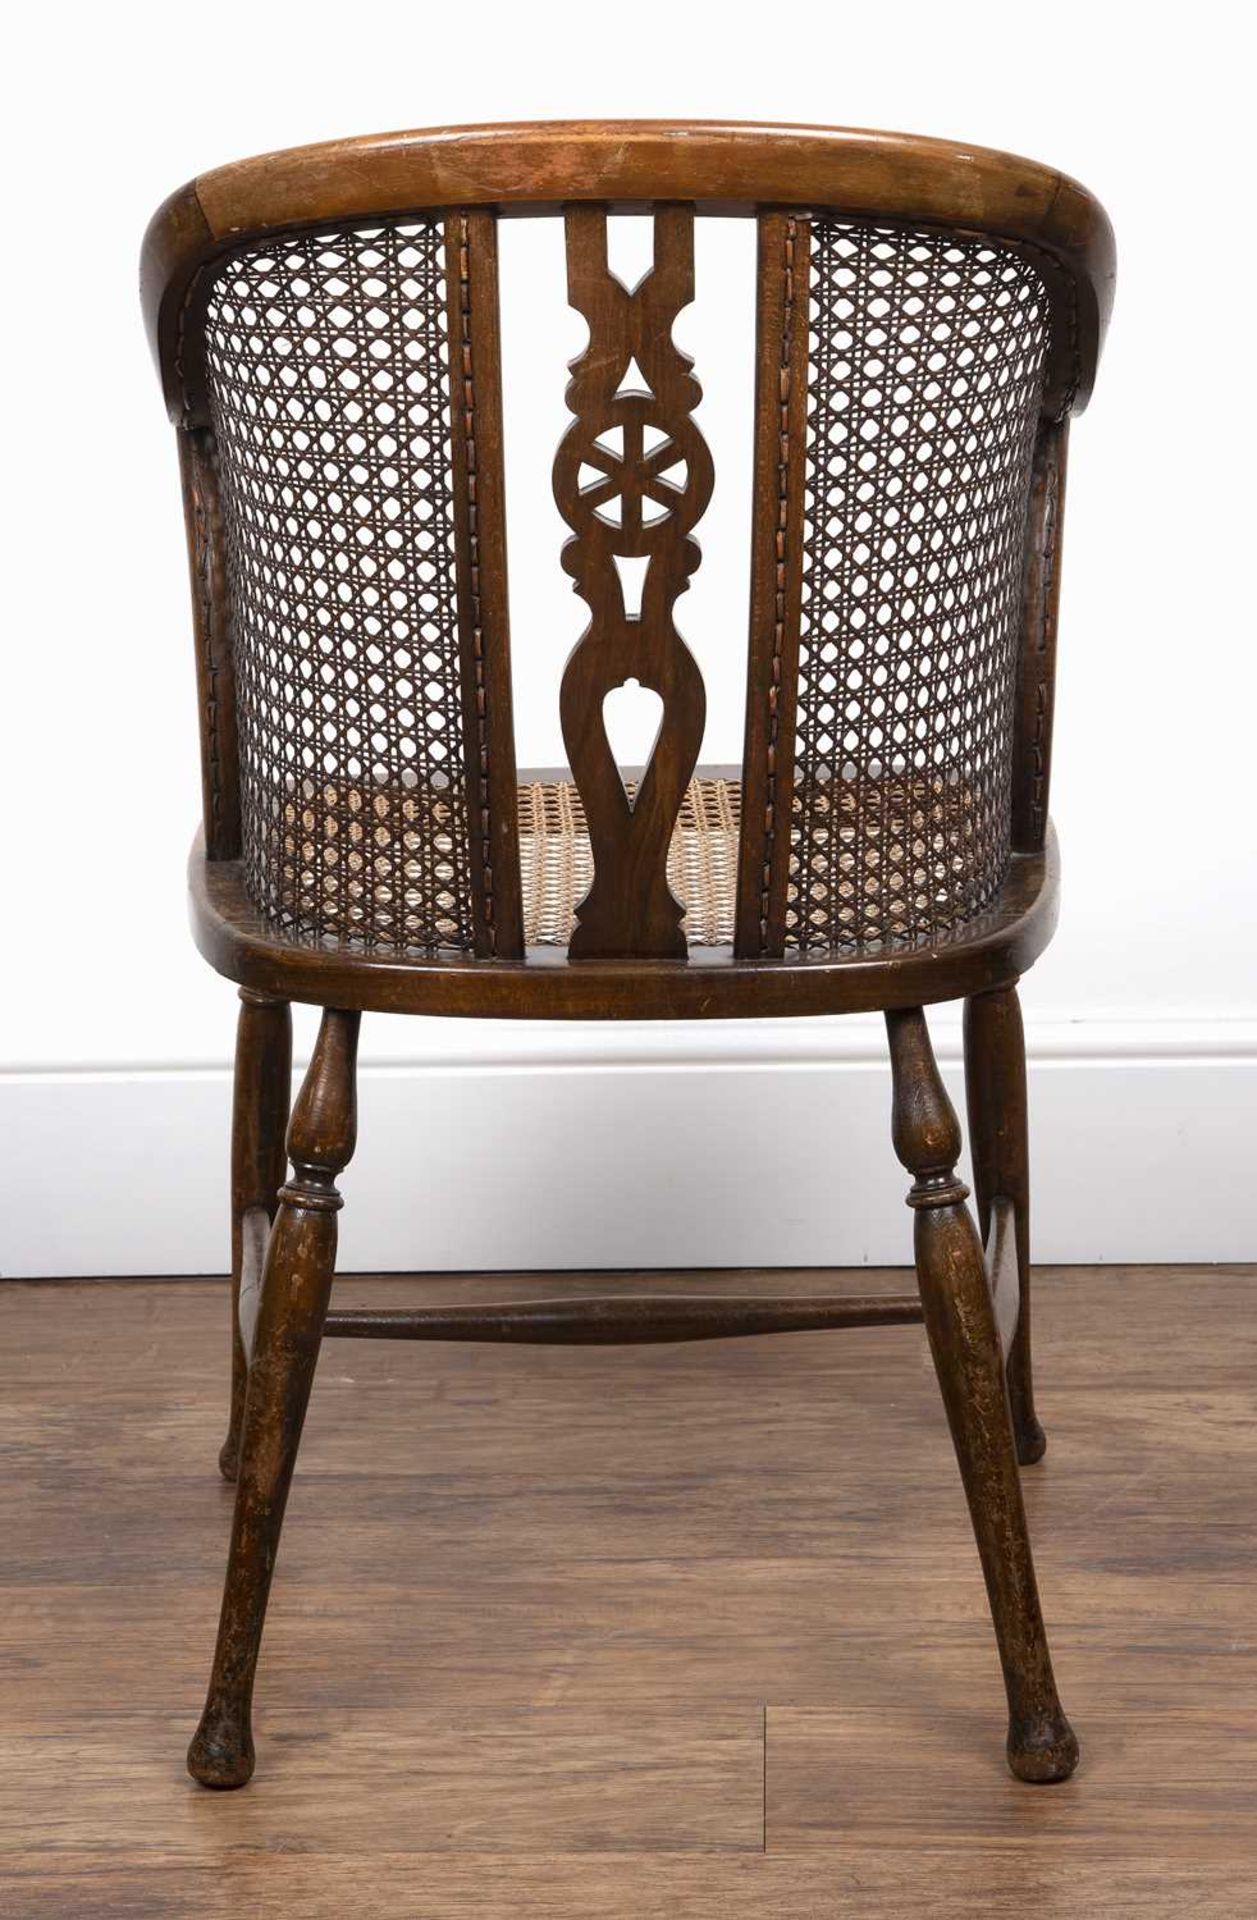 Edwardian bergere caned chair by Arthur Newbery Ltd, beech frame, with pierced wheel splat to the - Image 3 of 3